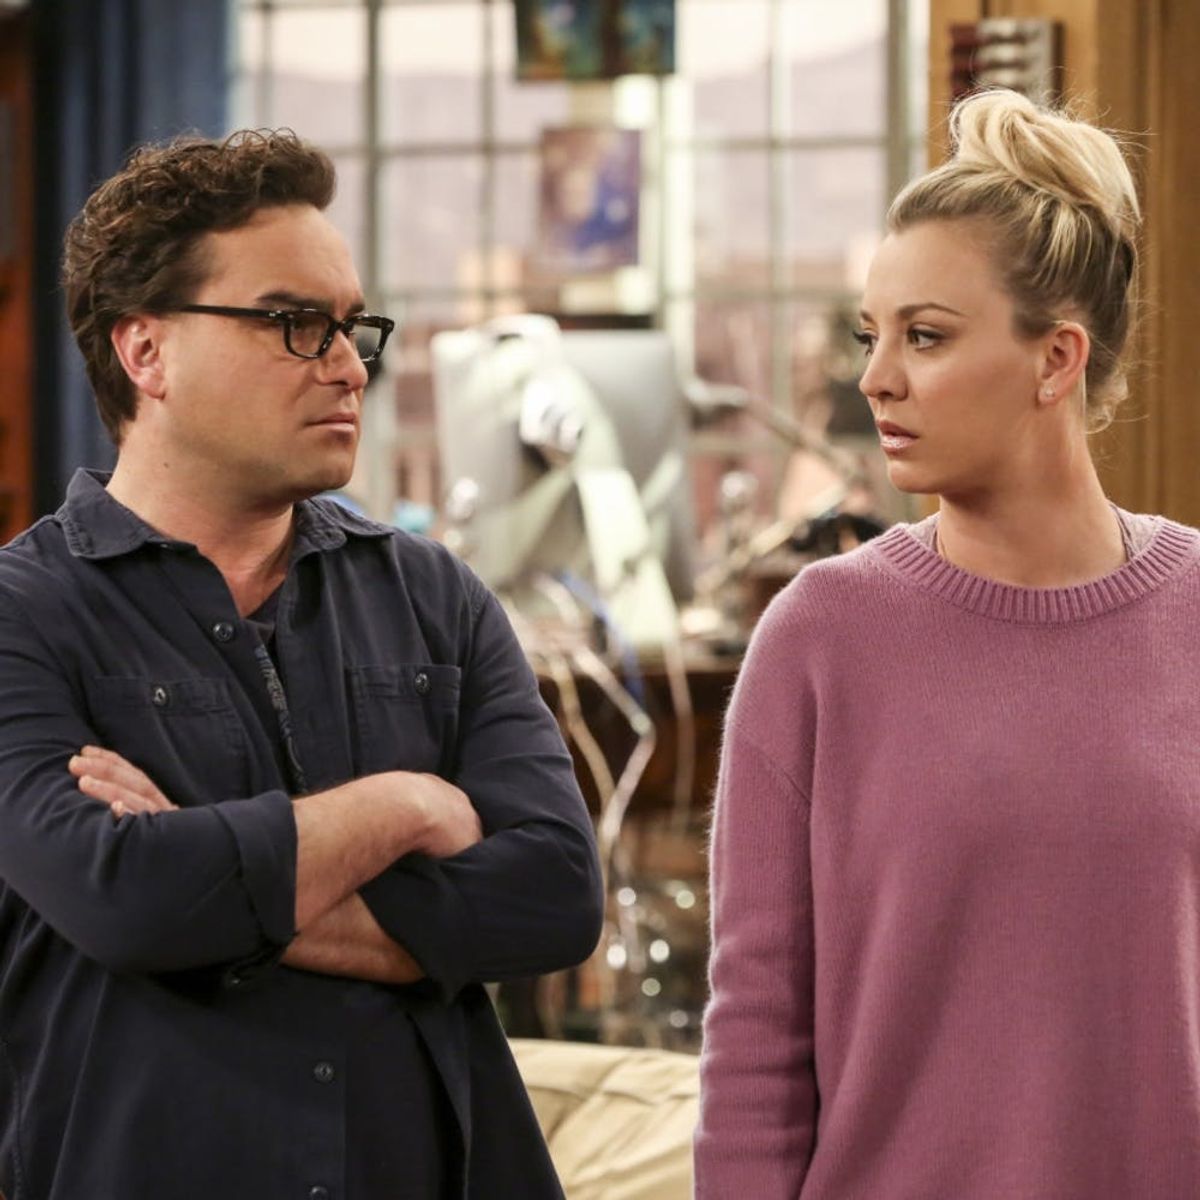 Kaley Cuoco Says She’s ‘Drowning in Tears’ Over ‘Big Bang Theory’ Ending